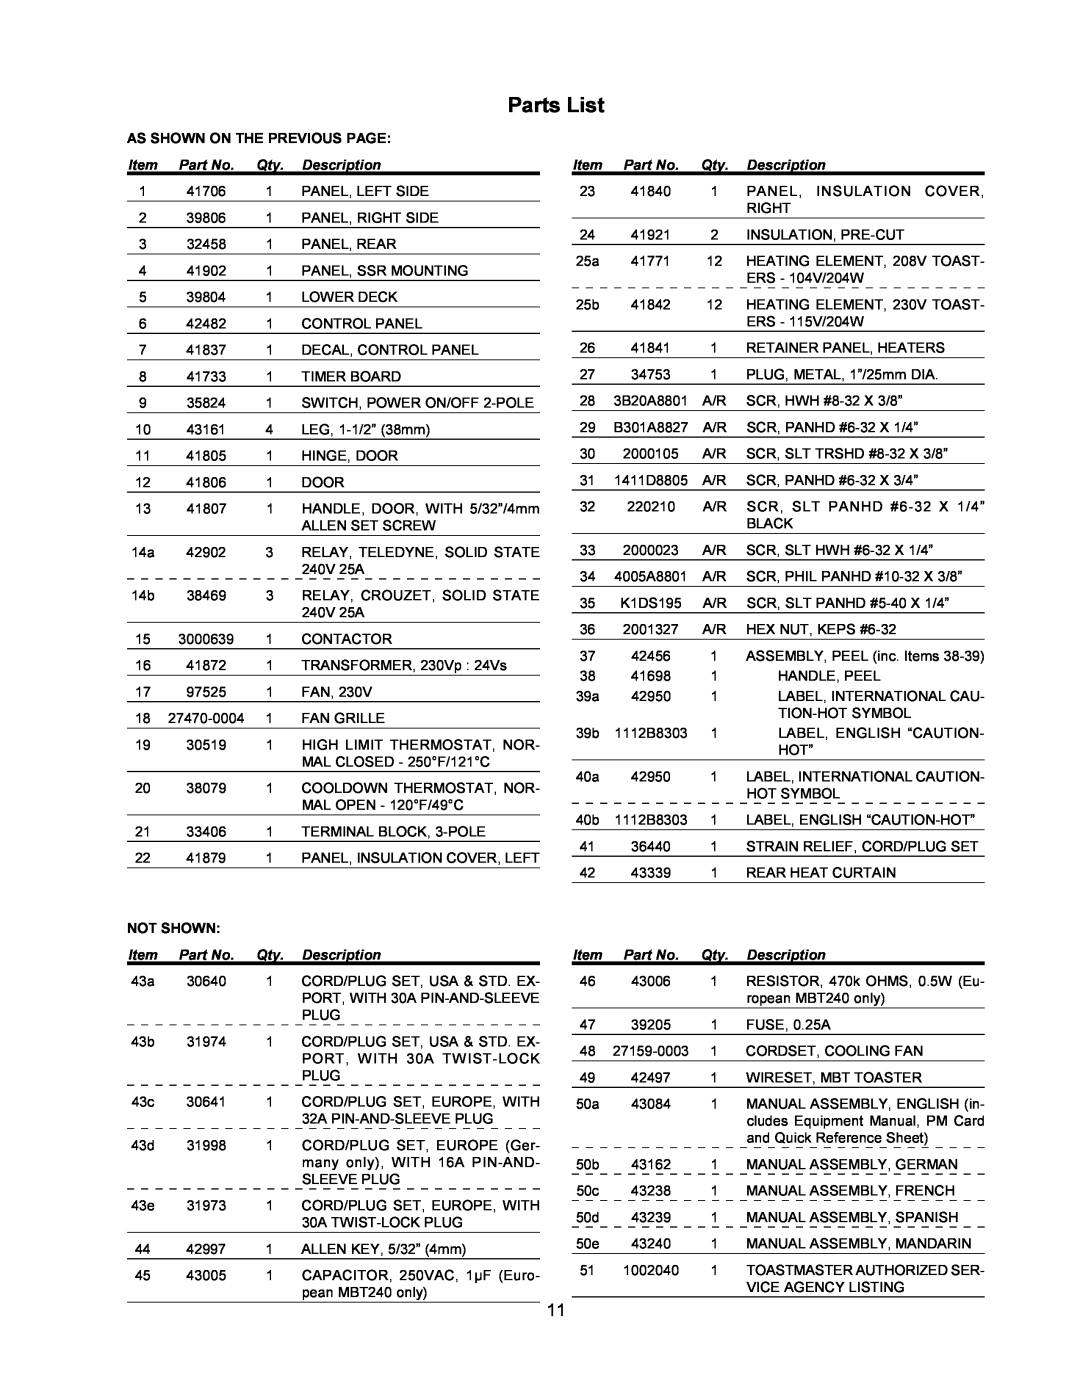 Toastmaster MBT208, MBT240 warranty Parts List, As Shown On The Previous Page, Description, Not Shown 